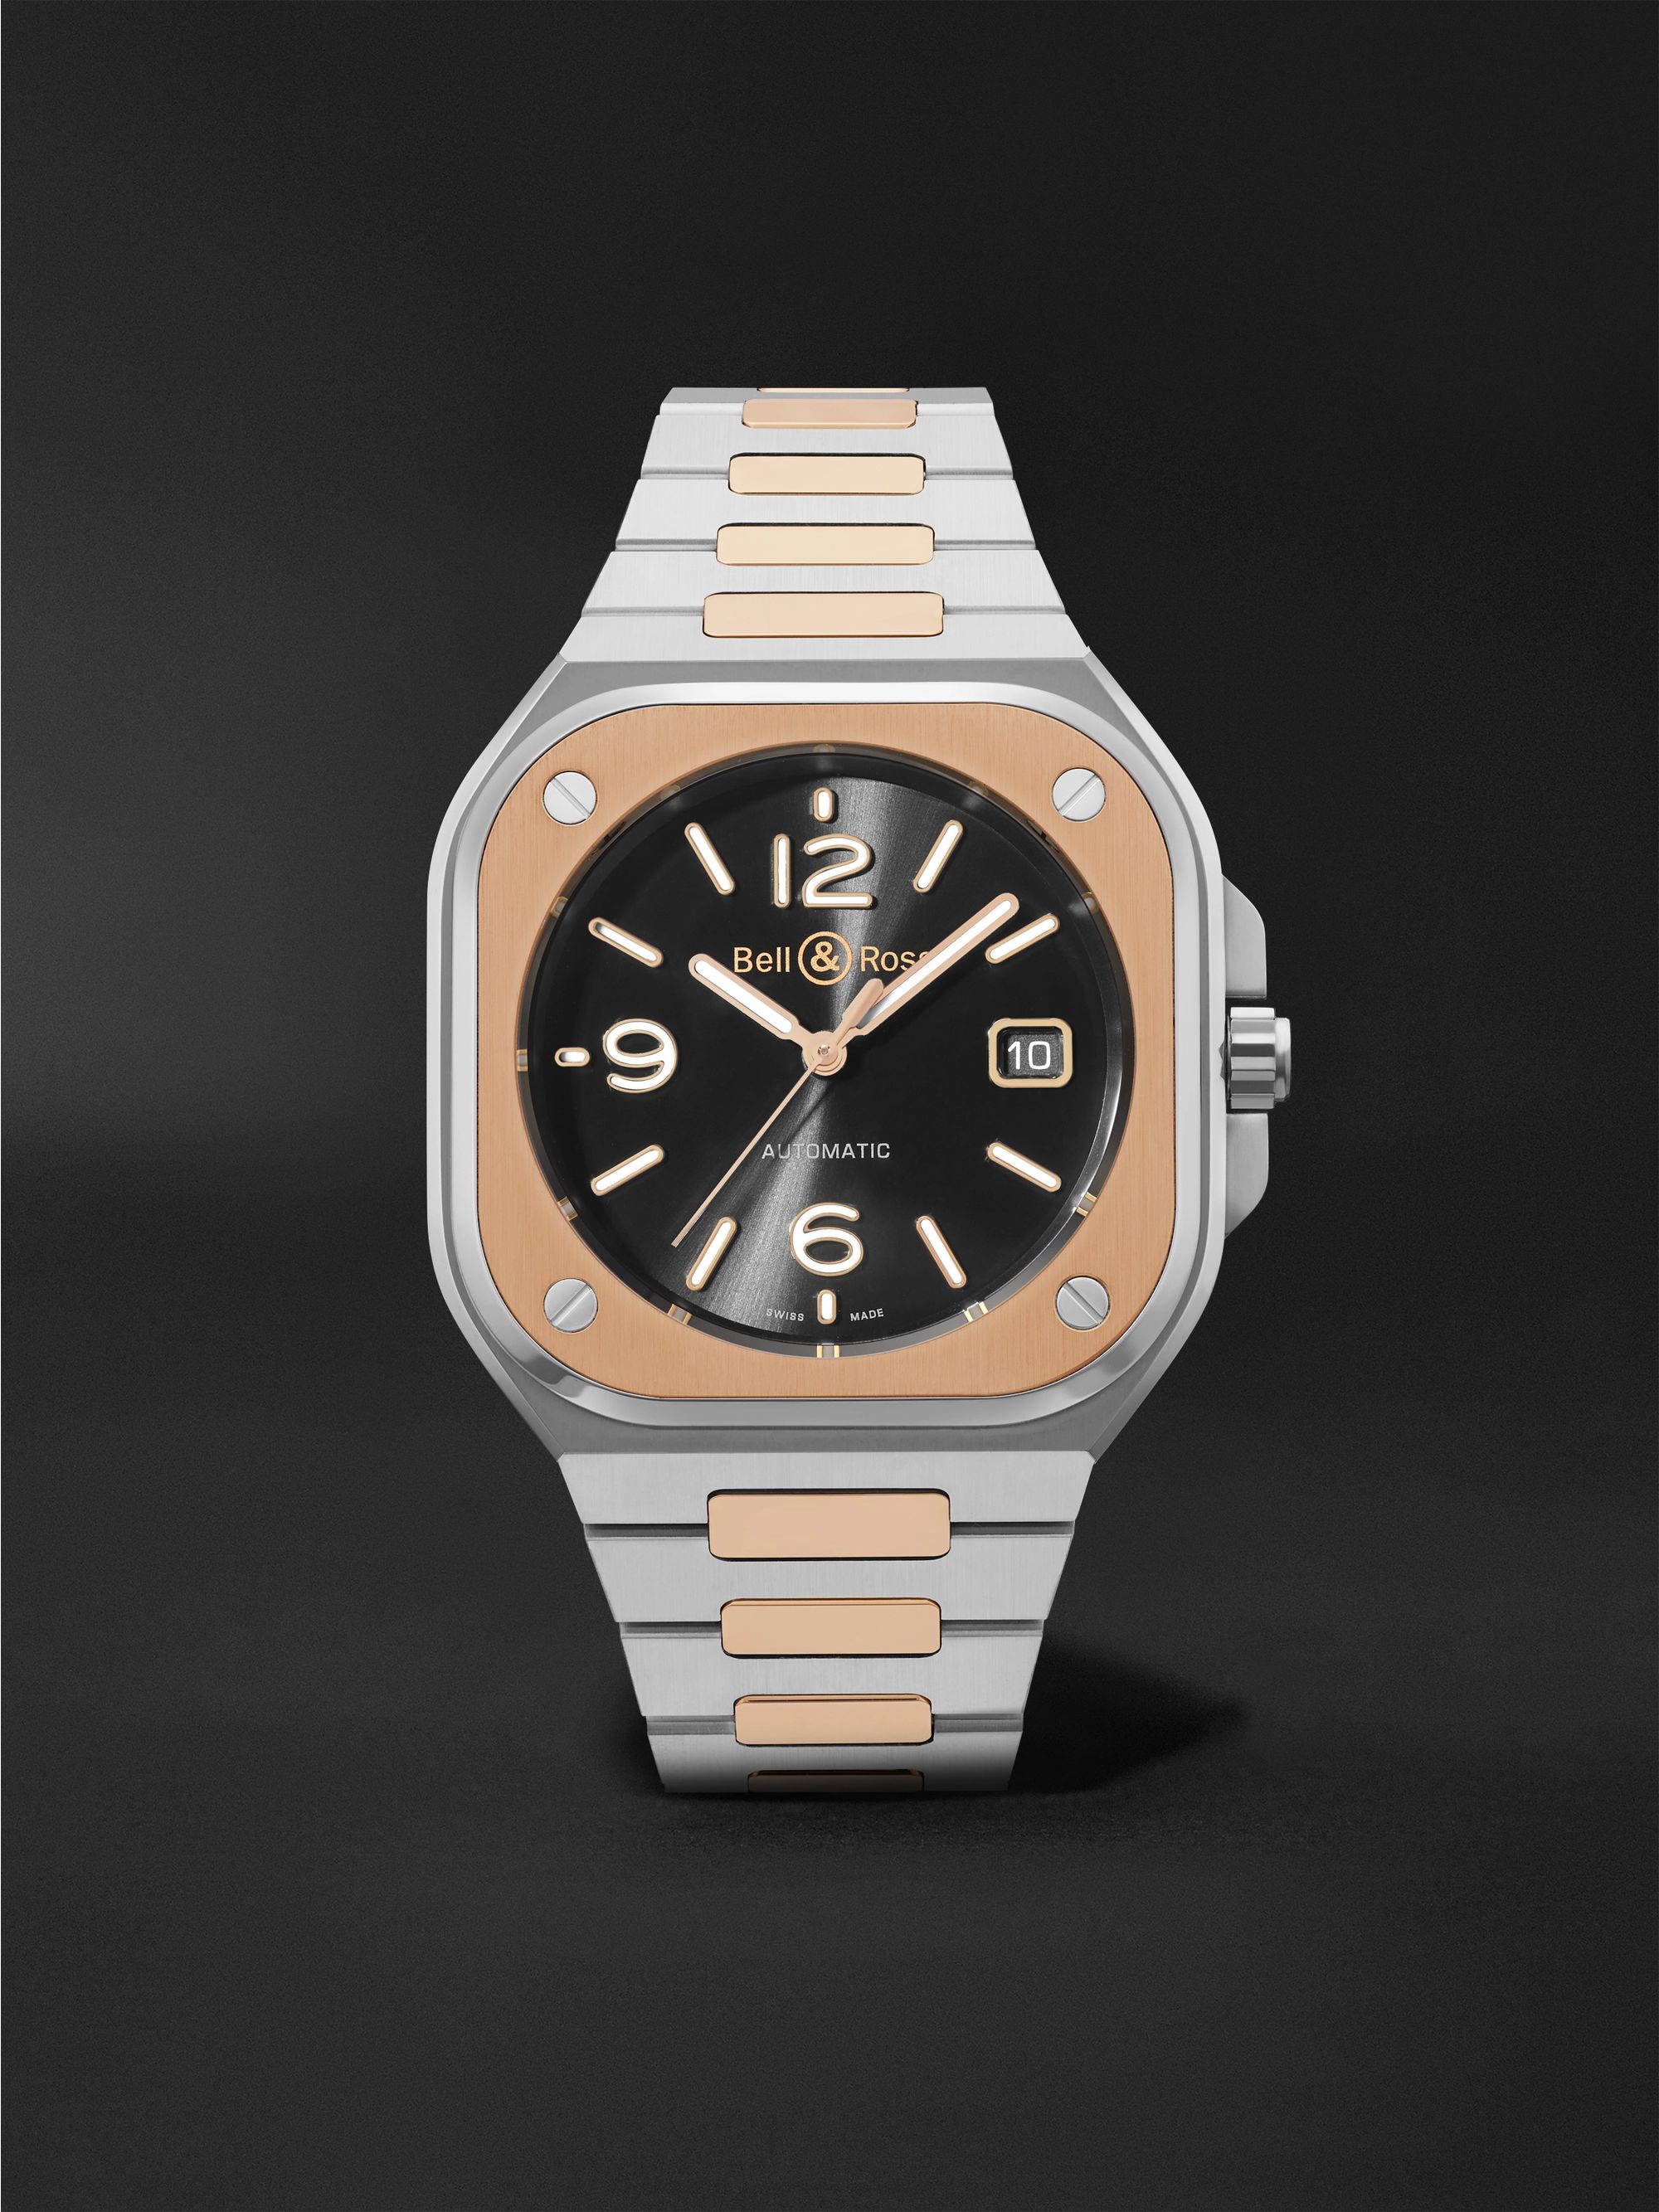 BELL & ROSS BR 05 Black Steel and Gold Automatic 40mm 18-Karat Rose Gold and Steel Watch, Ref. No. BR05A-BL-STPG/SSG